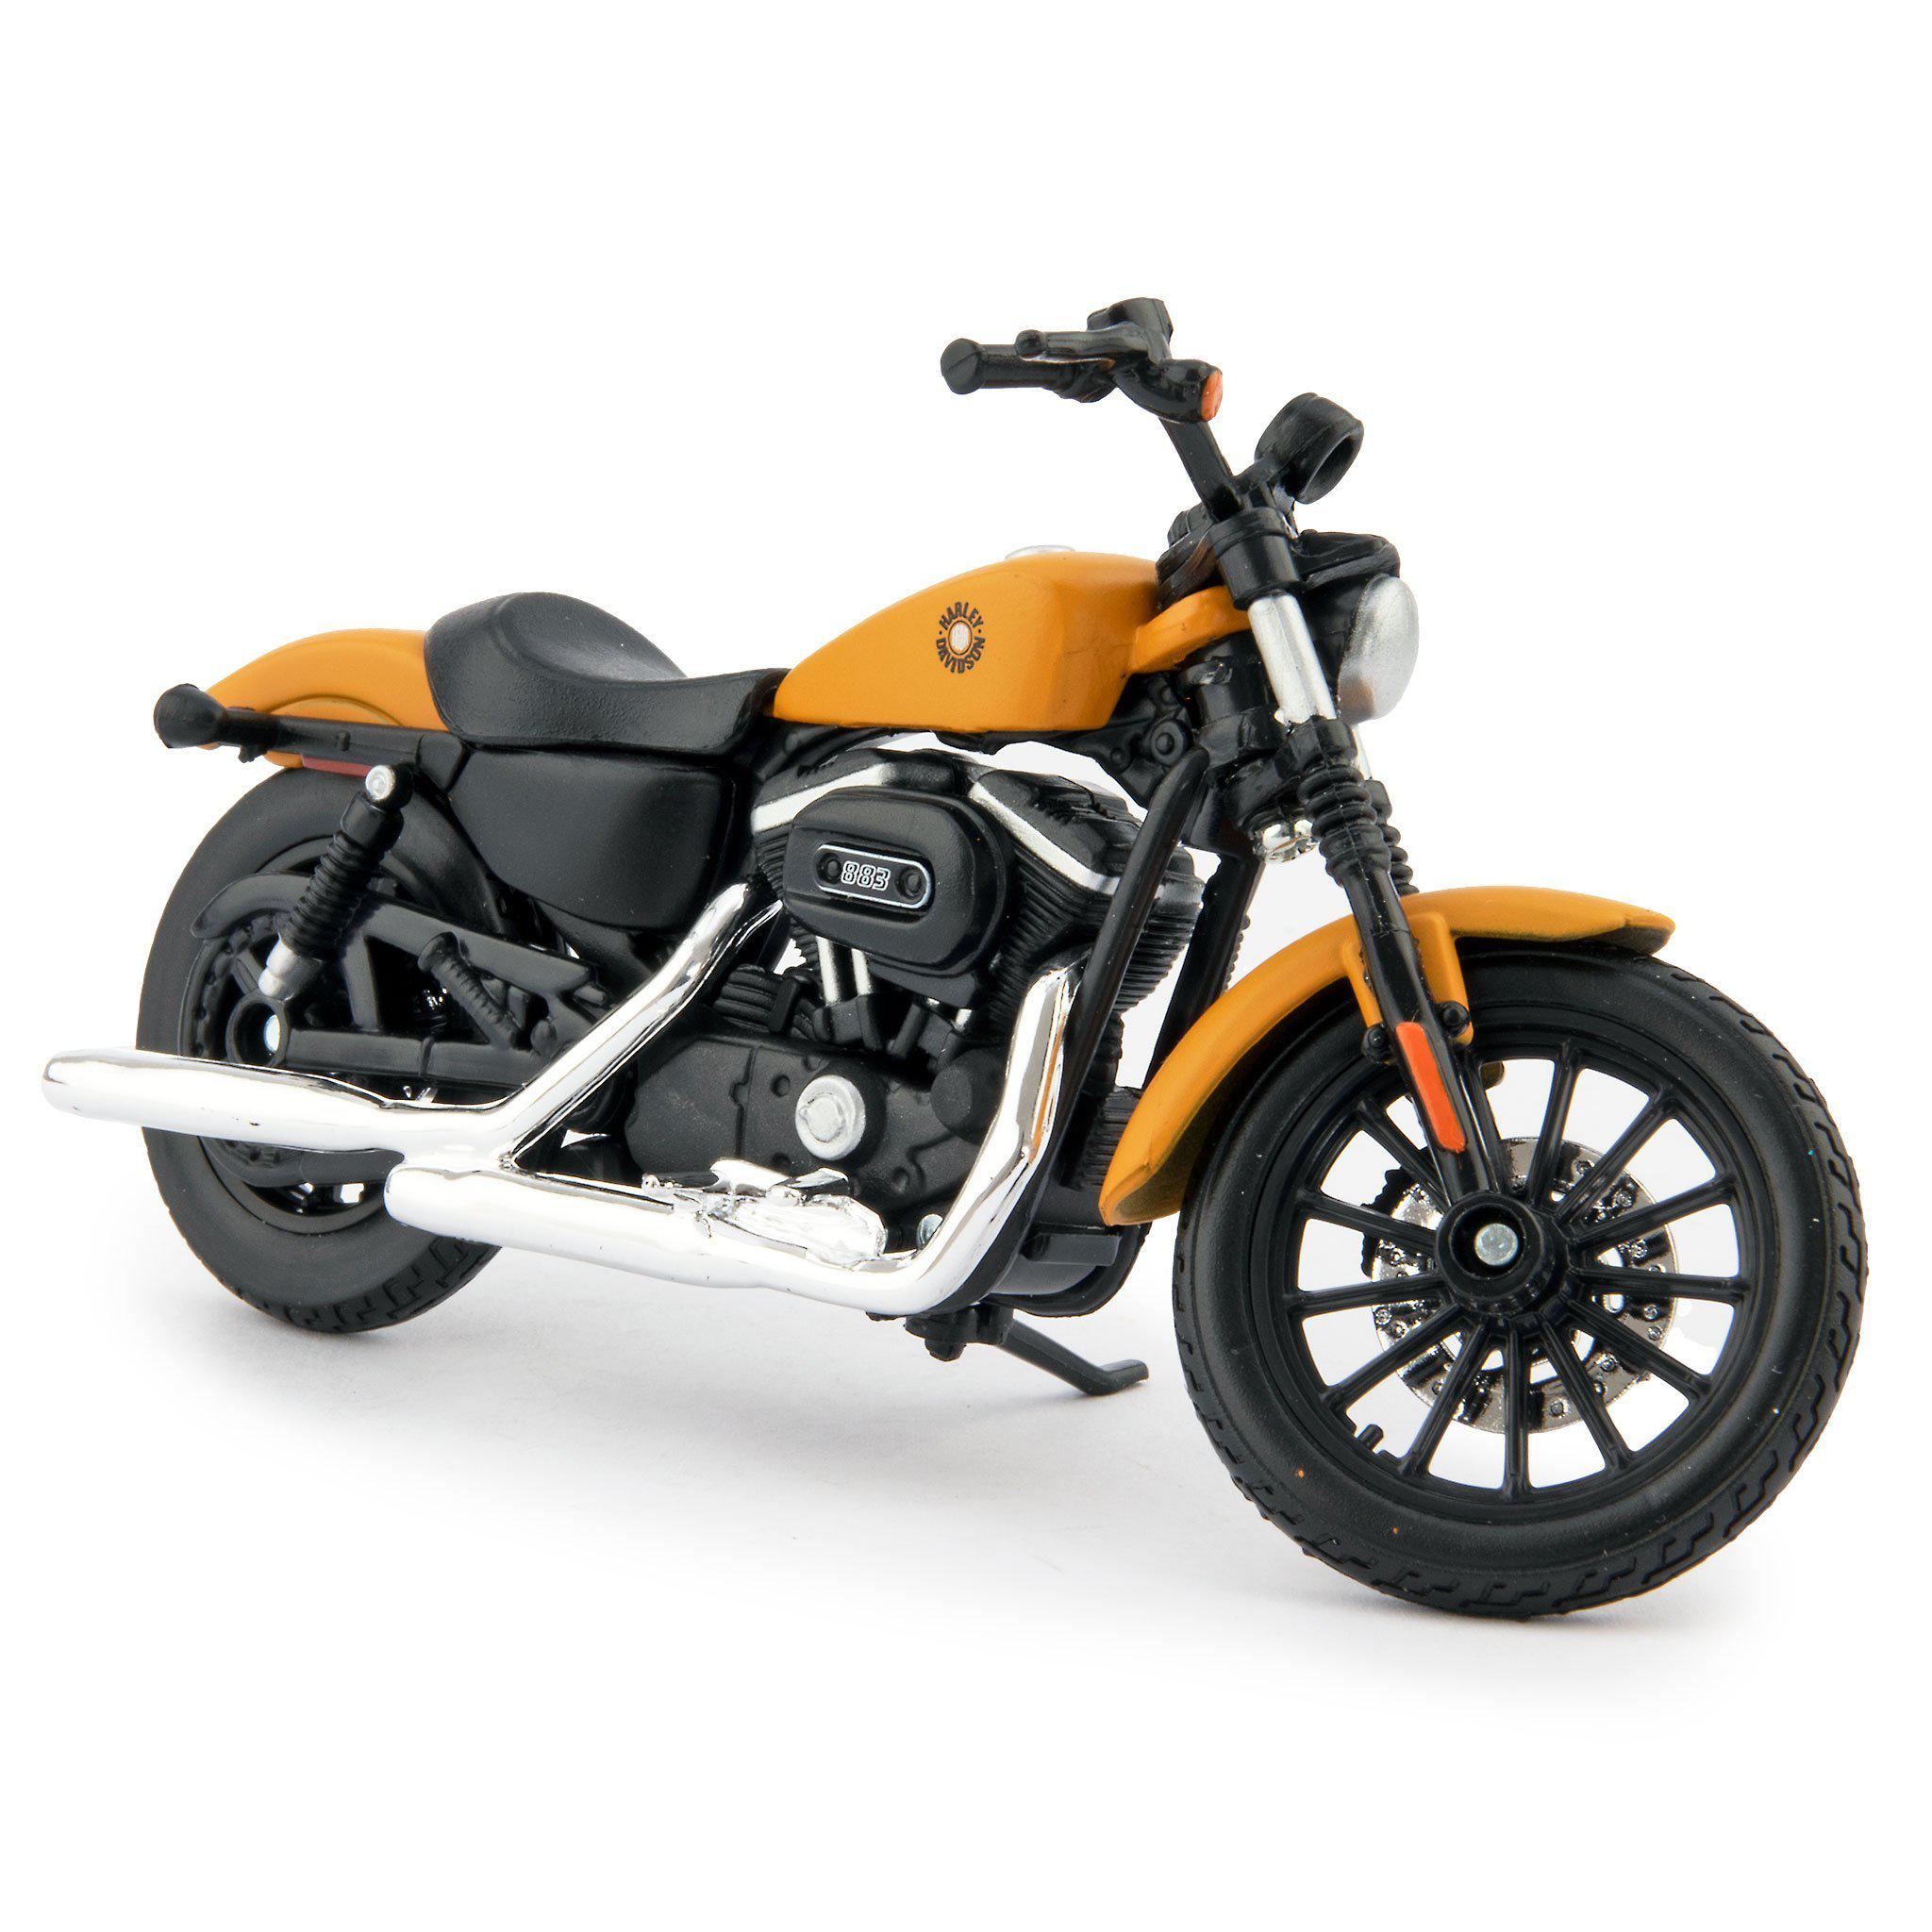 Harley-Davidson Sportster Iron 883 Diecast Model Motorcycle 2014 yellow- 1:18 scale-Maisto-Diecast Model Centre